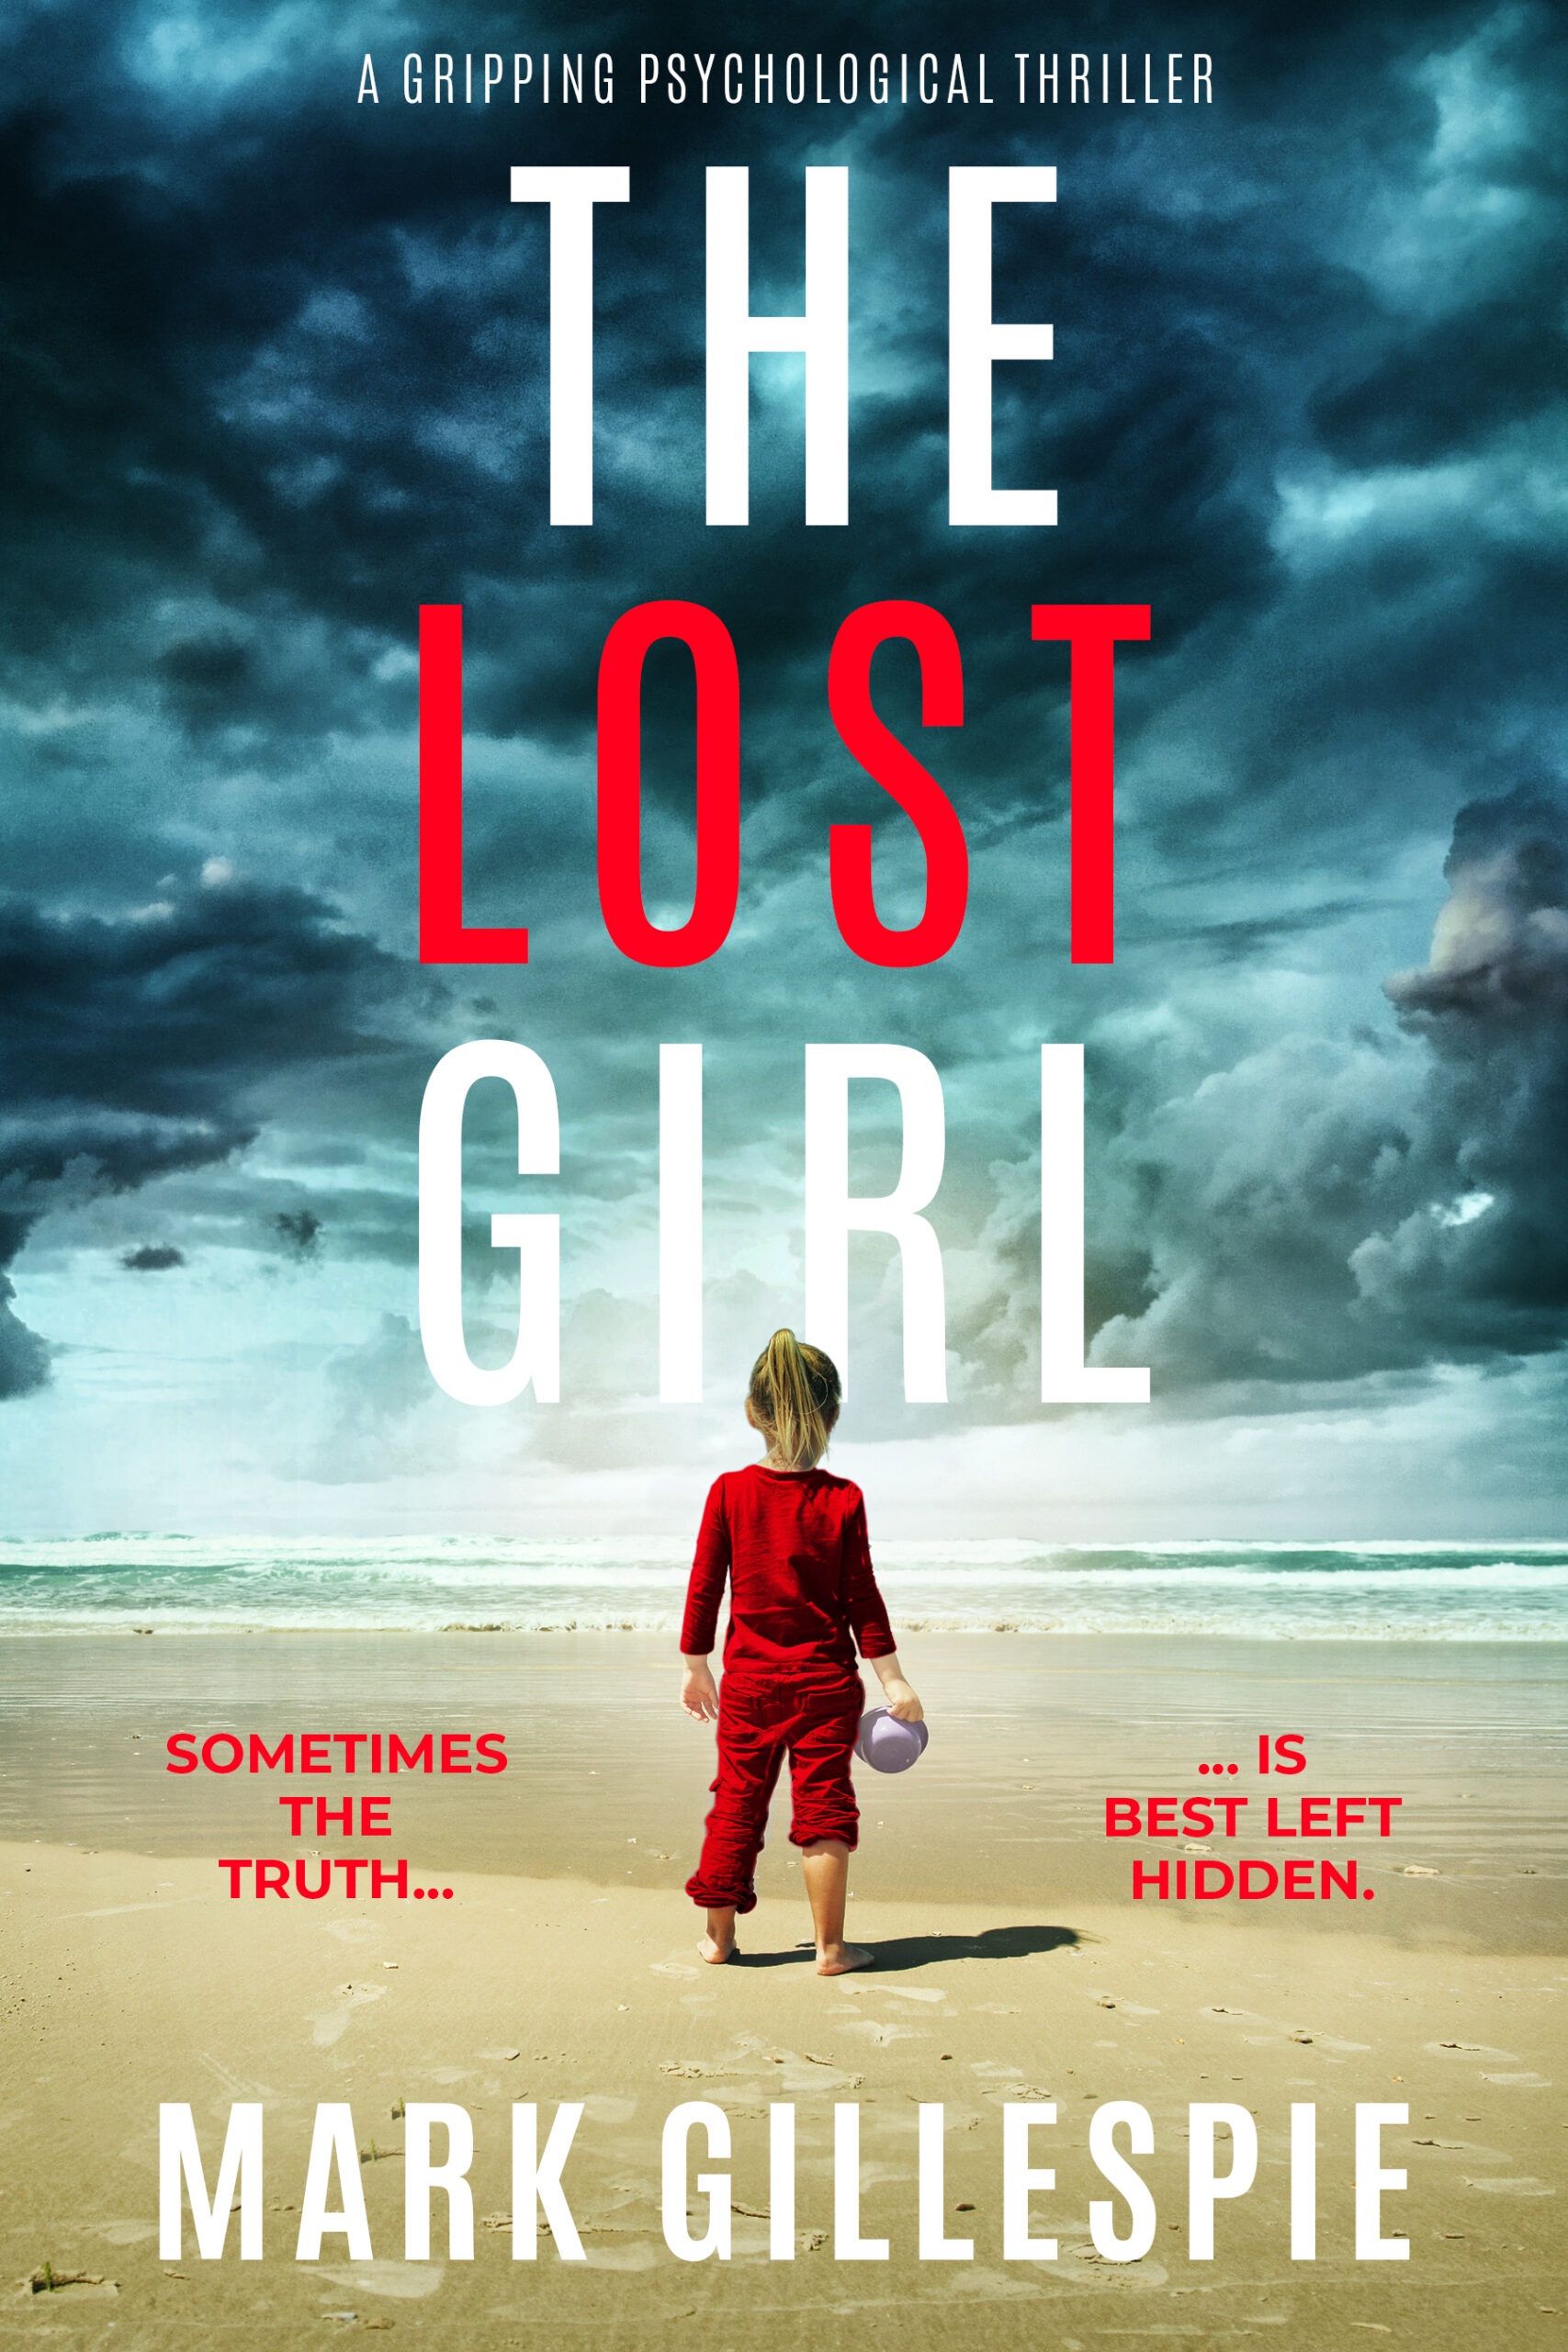 MARK GILLESPIE NEW RELEASE – THE LOST GIRL